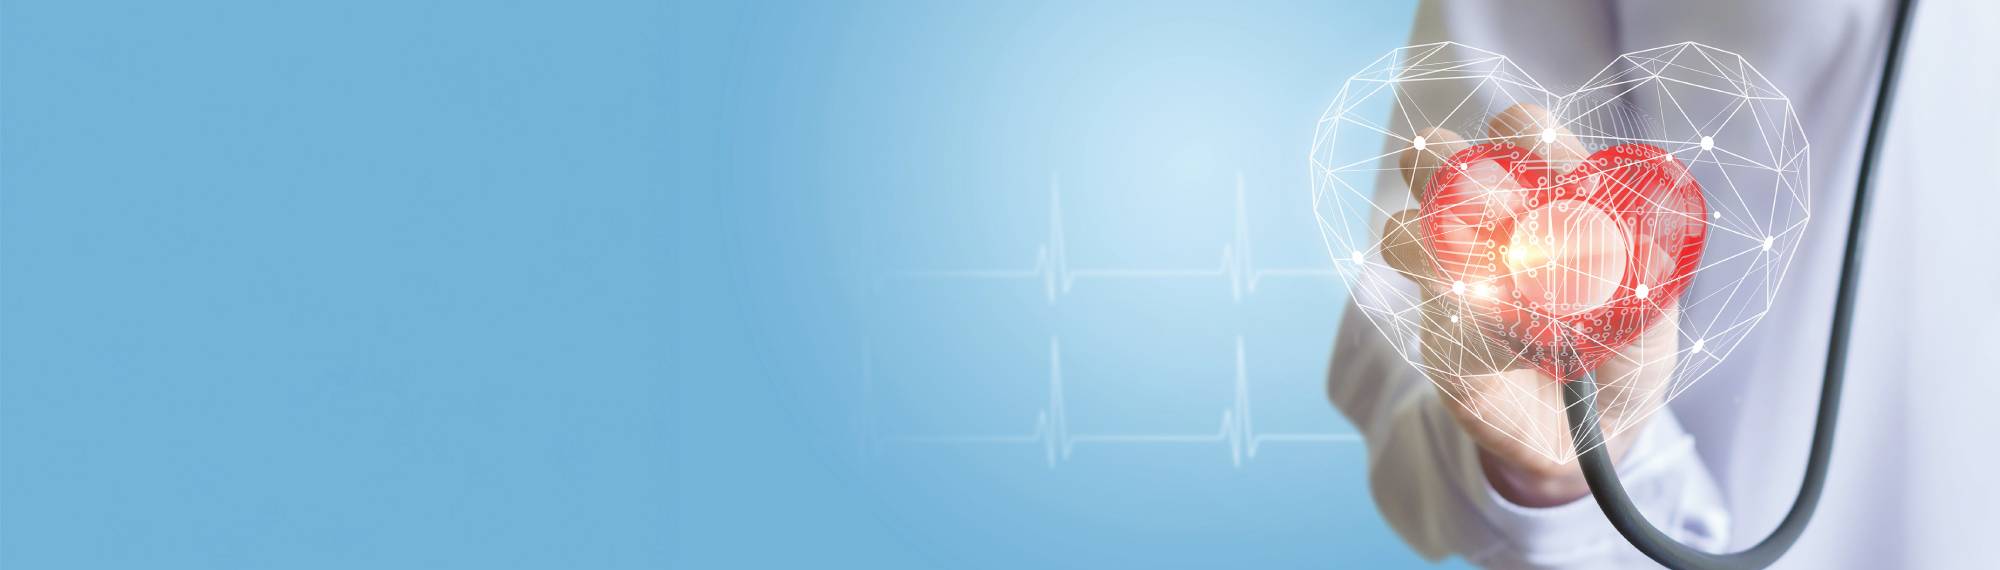 cardiology-banner